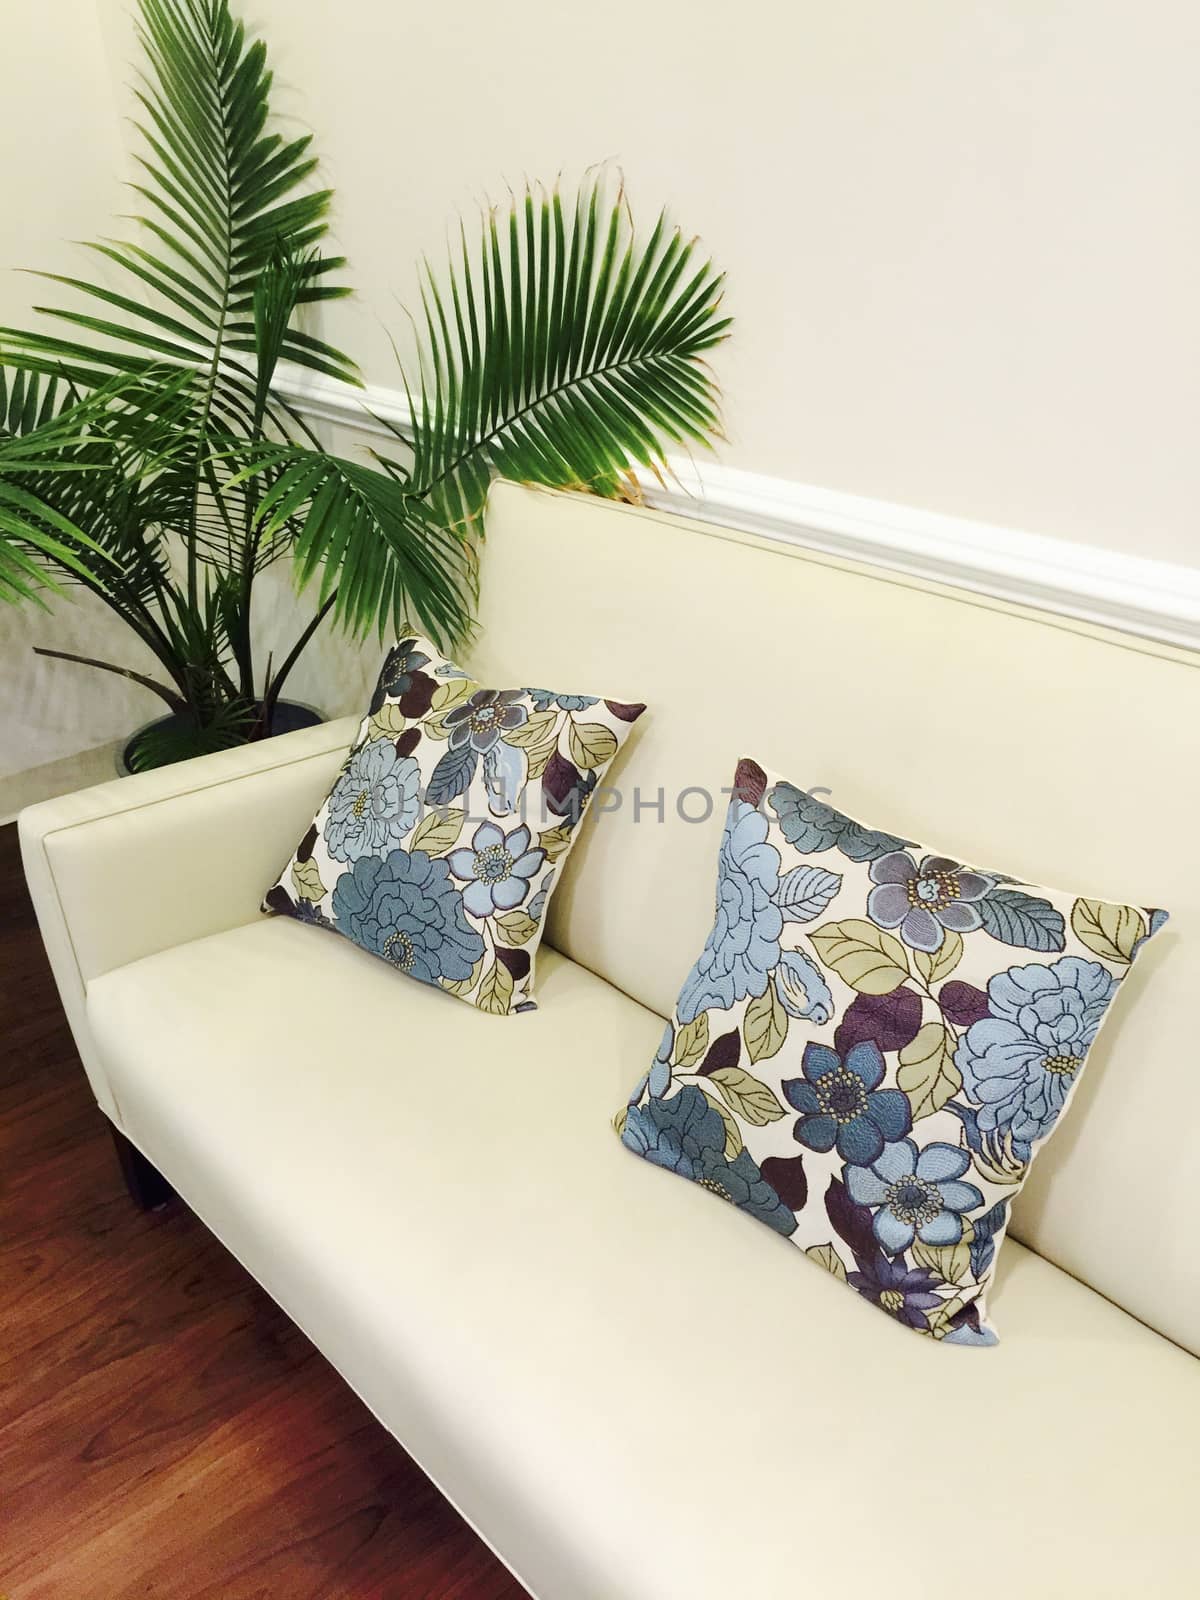 Waiting room with colorful cushions on cough, interior.